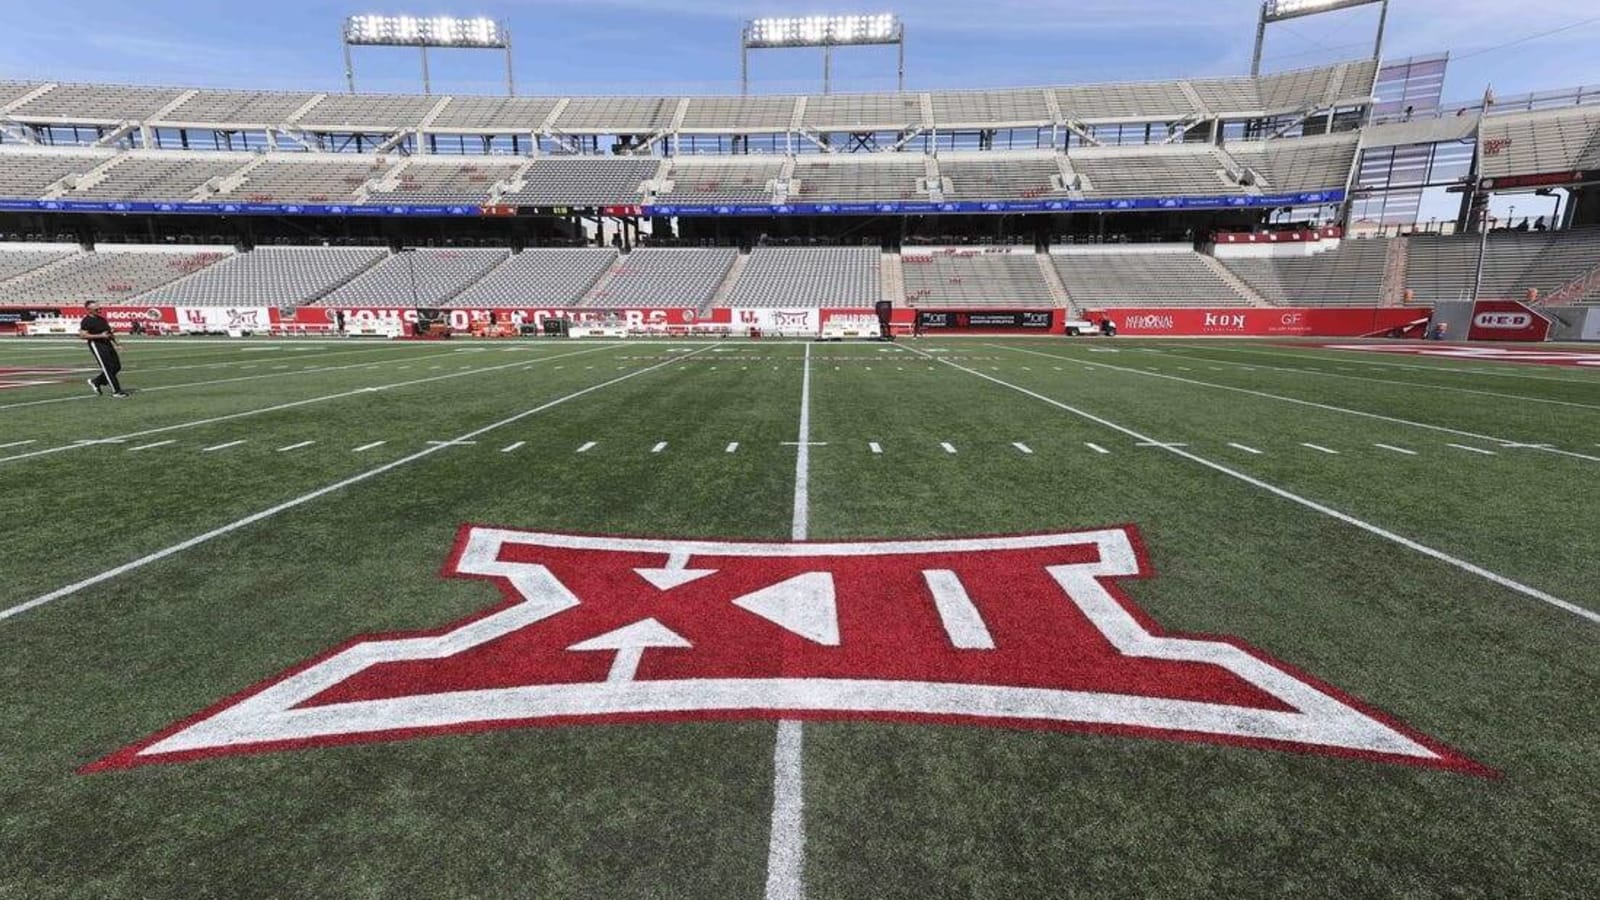 Reports: Big 12 first to agree to House v. NCAA settlement